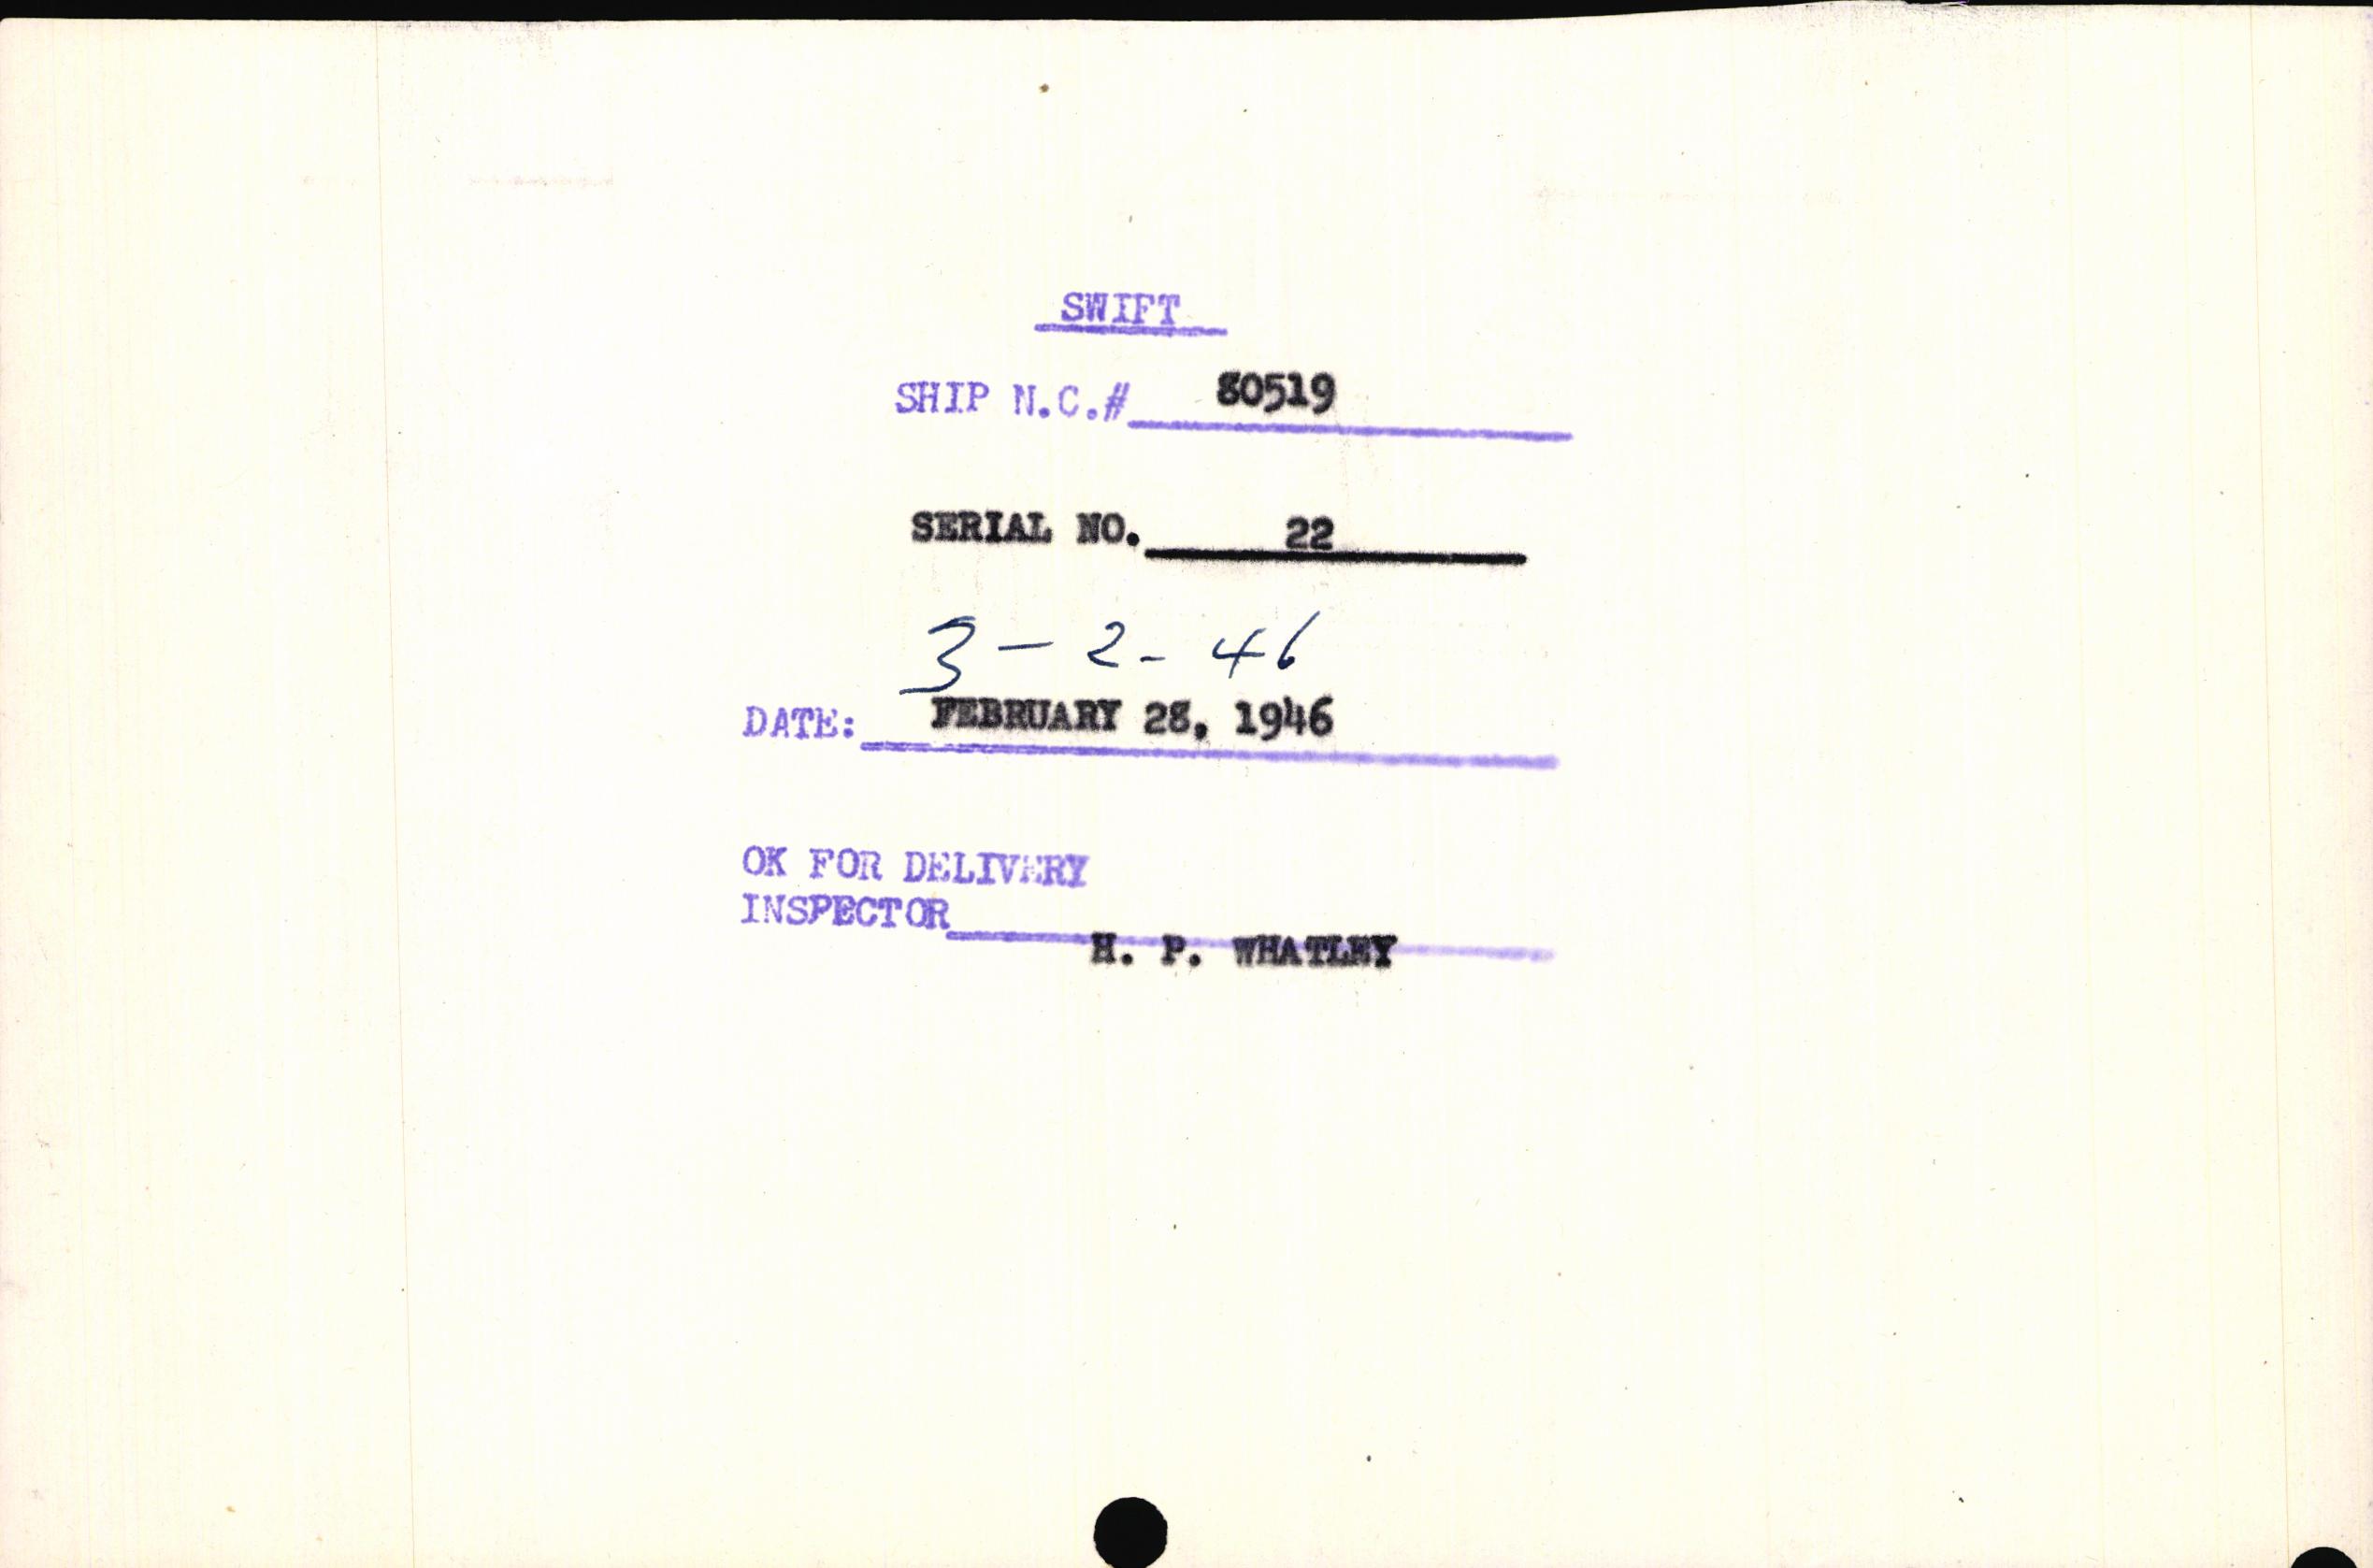 Sample page 3 from AirCorps Library document: Technical Information for Serial Number 22